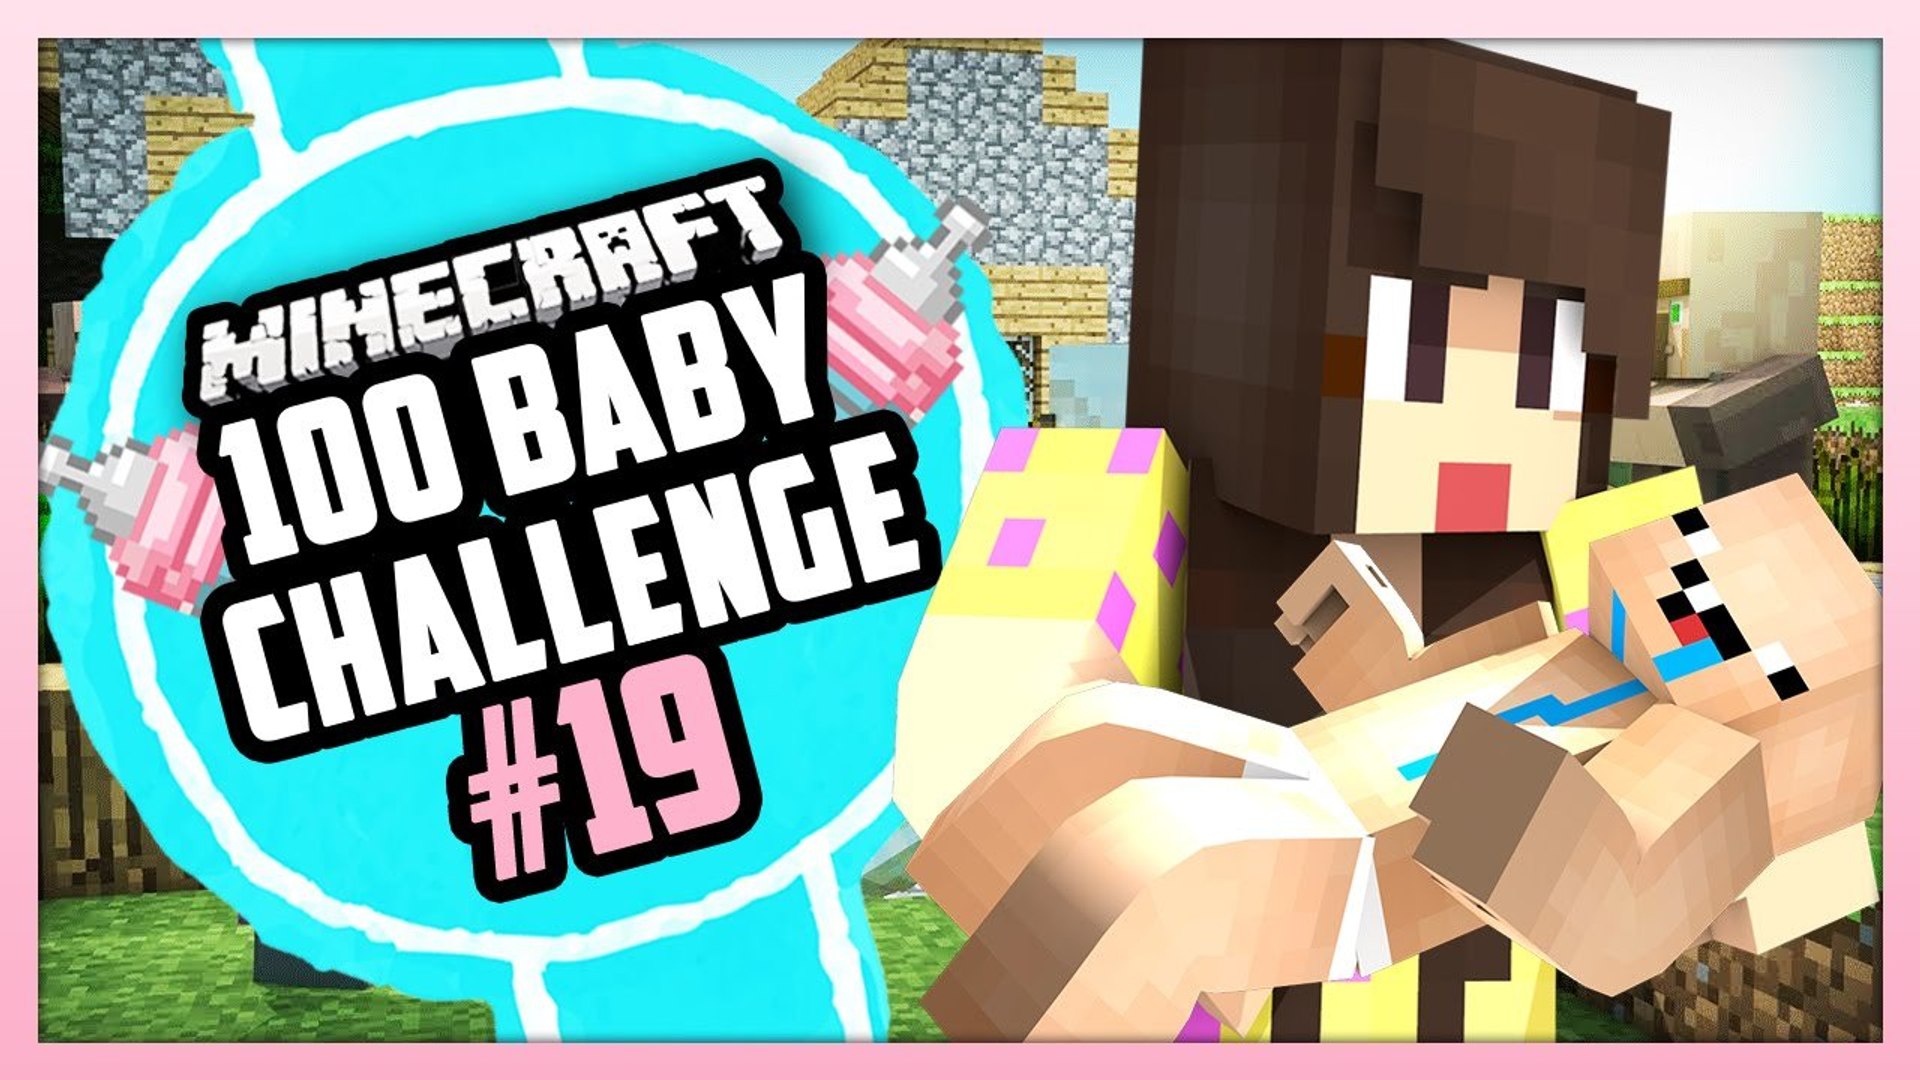 I M Lost And Dead Minecraft 100 Baby Challenge Ep 19 Video Dailymotion